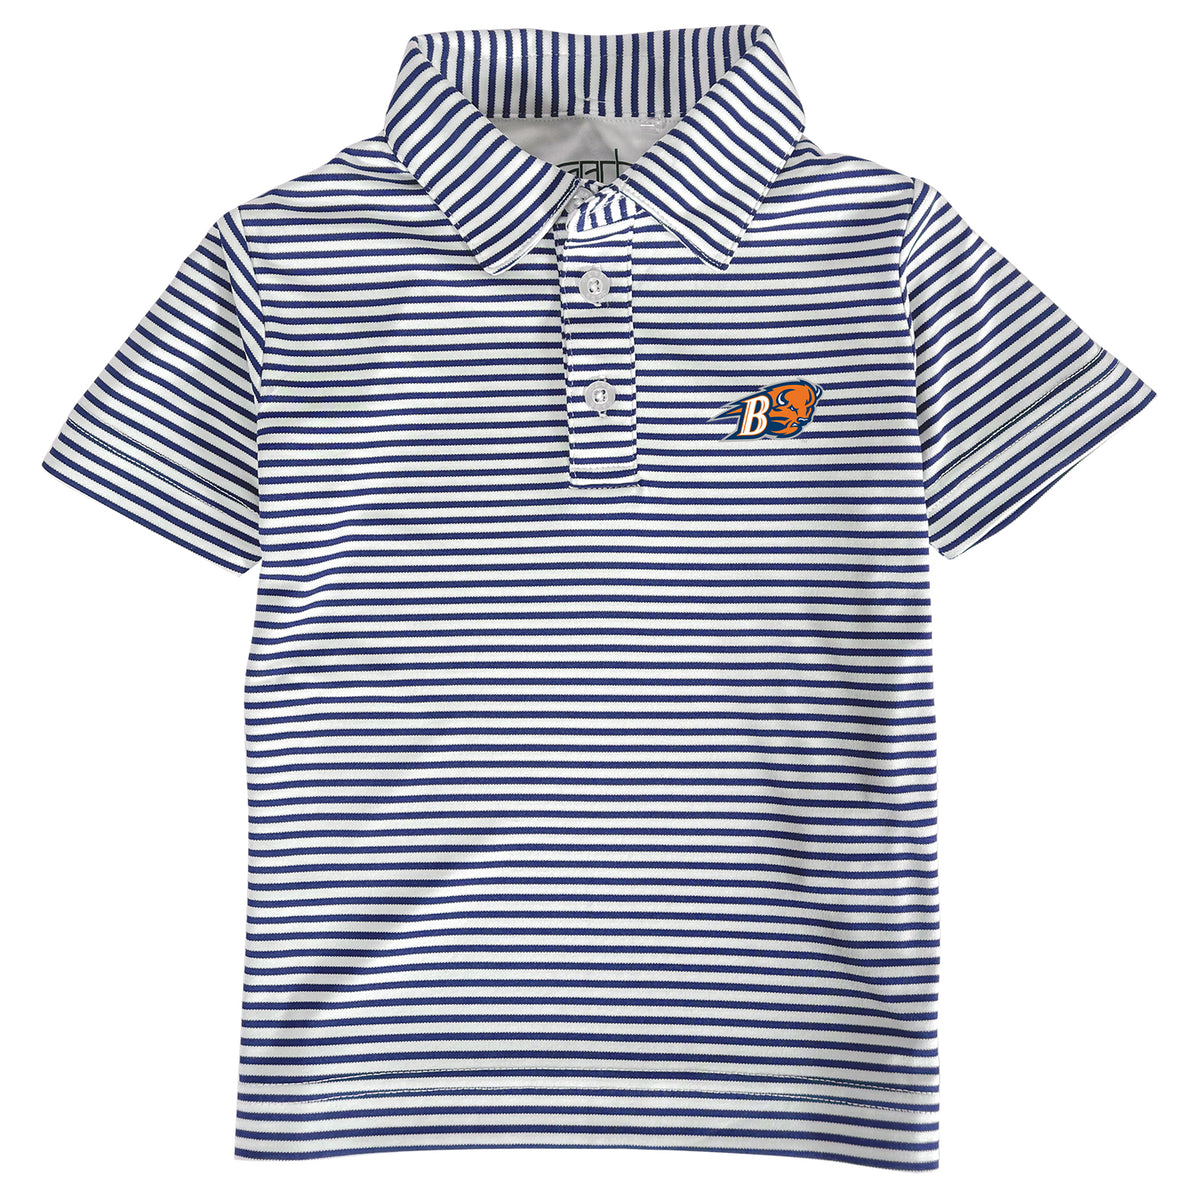 Bucknell Bison Toddler Boys' Polo